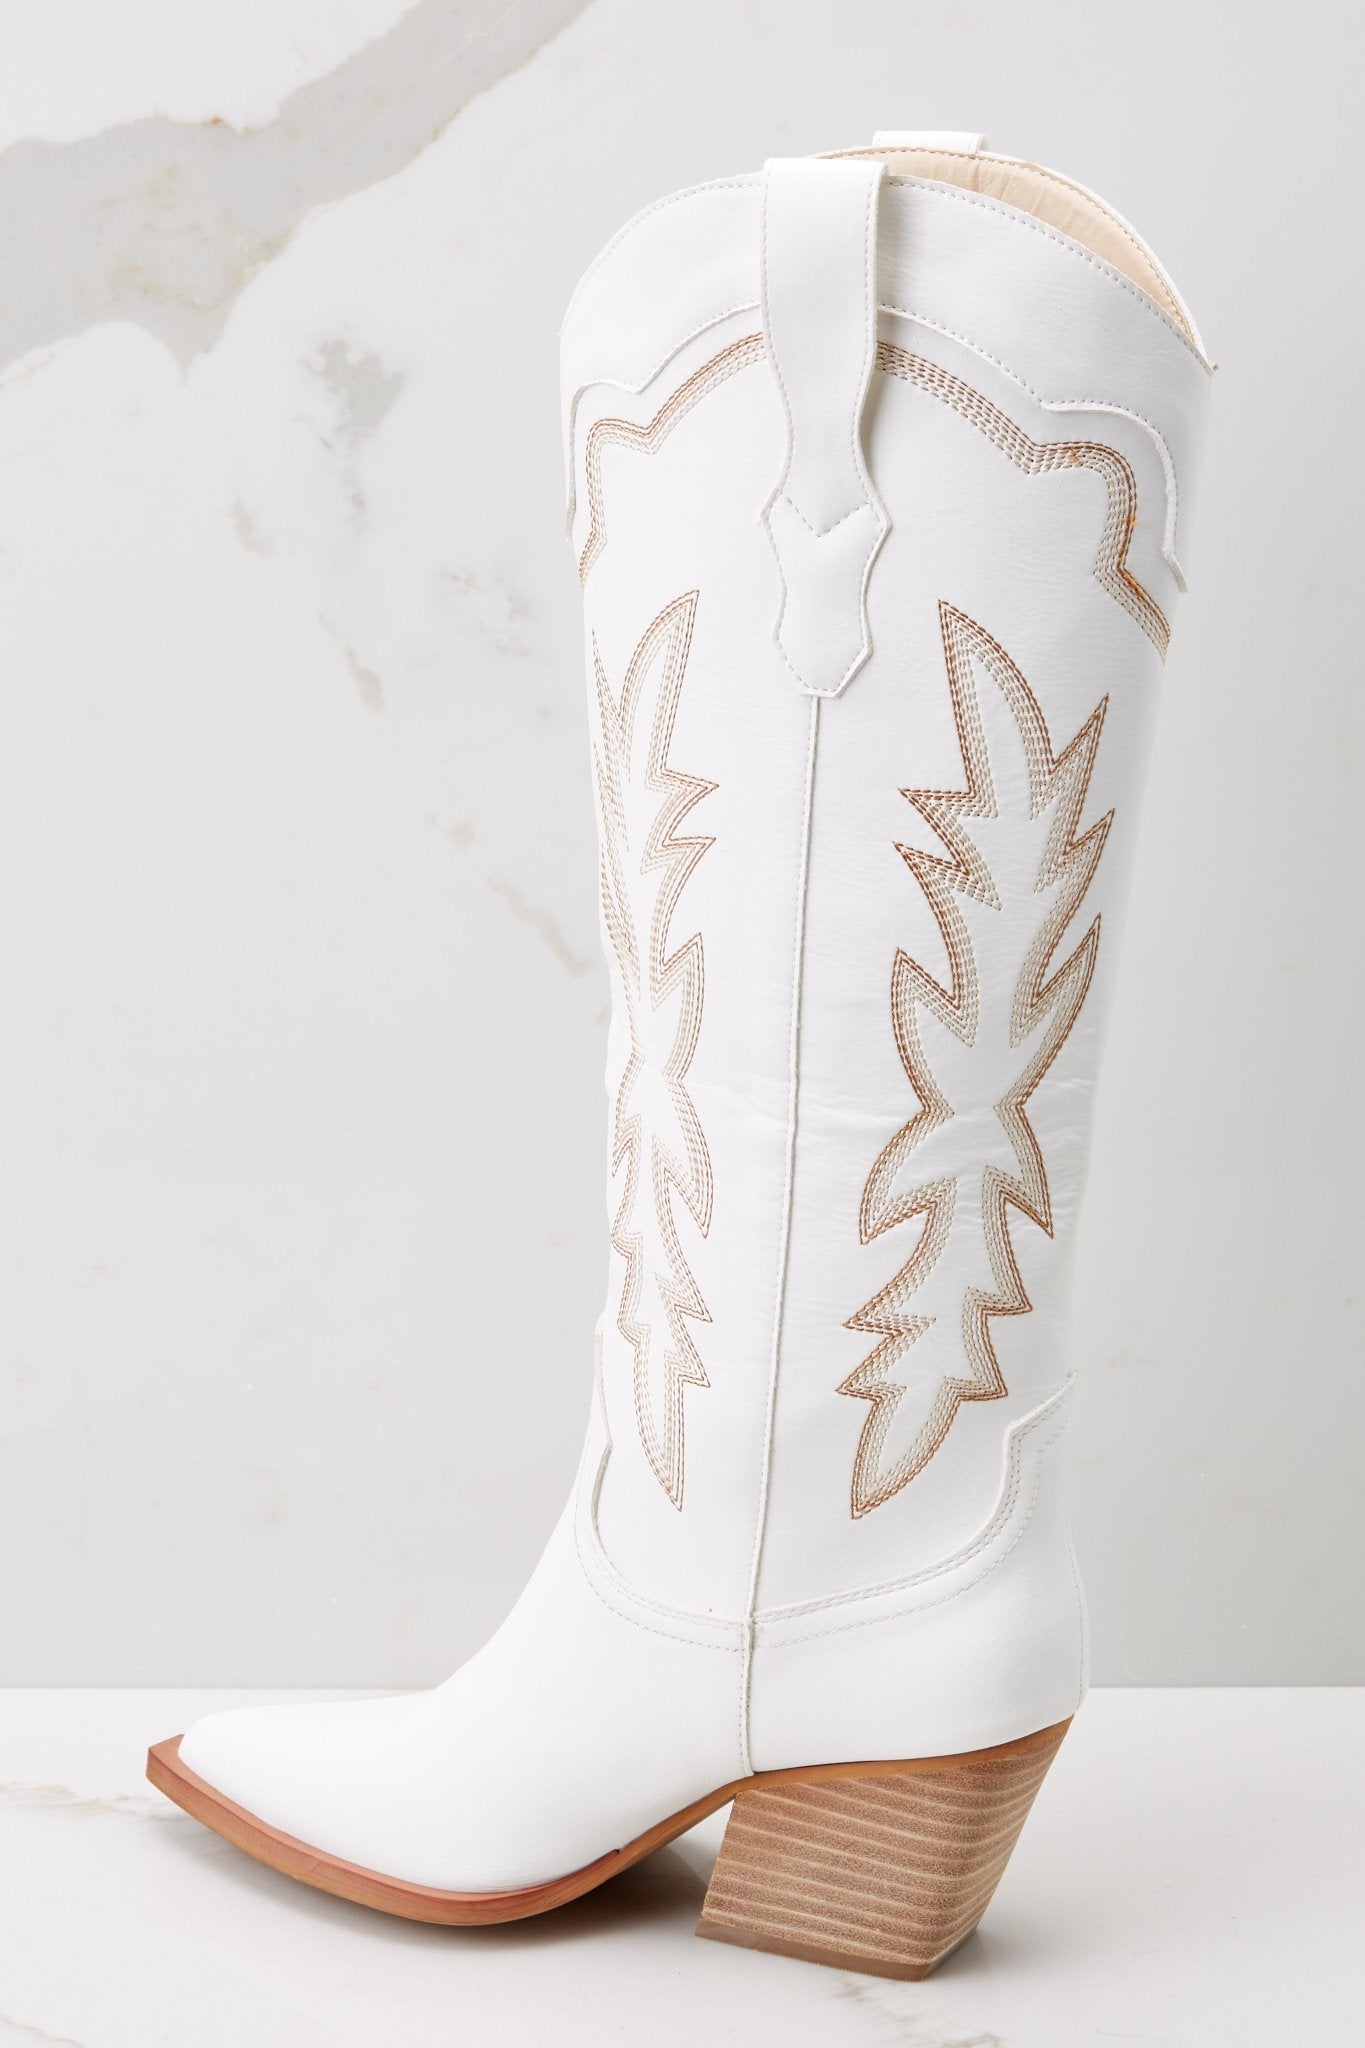 Inner-side view of these boots that feature a pointed toe and tan stitched design up the leg.